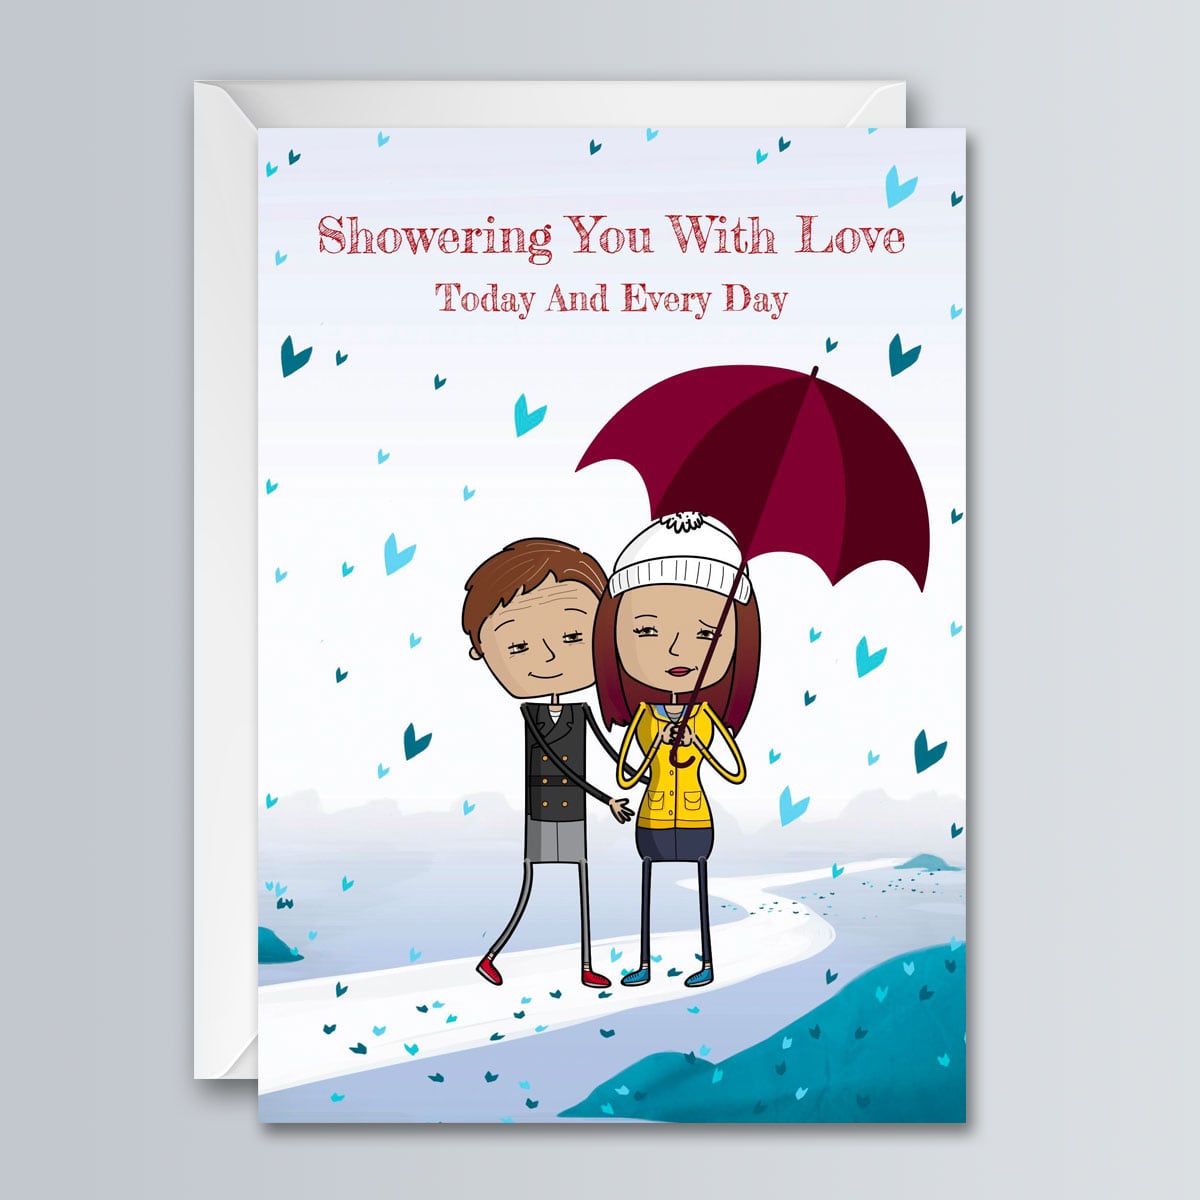 Showering You With Love - Greeting Card